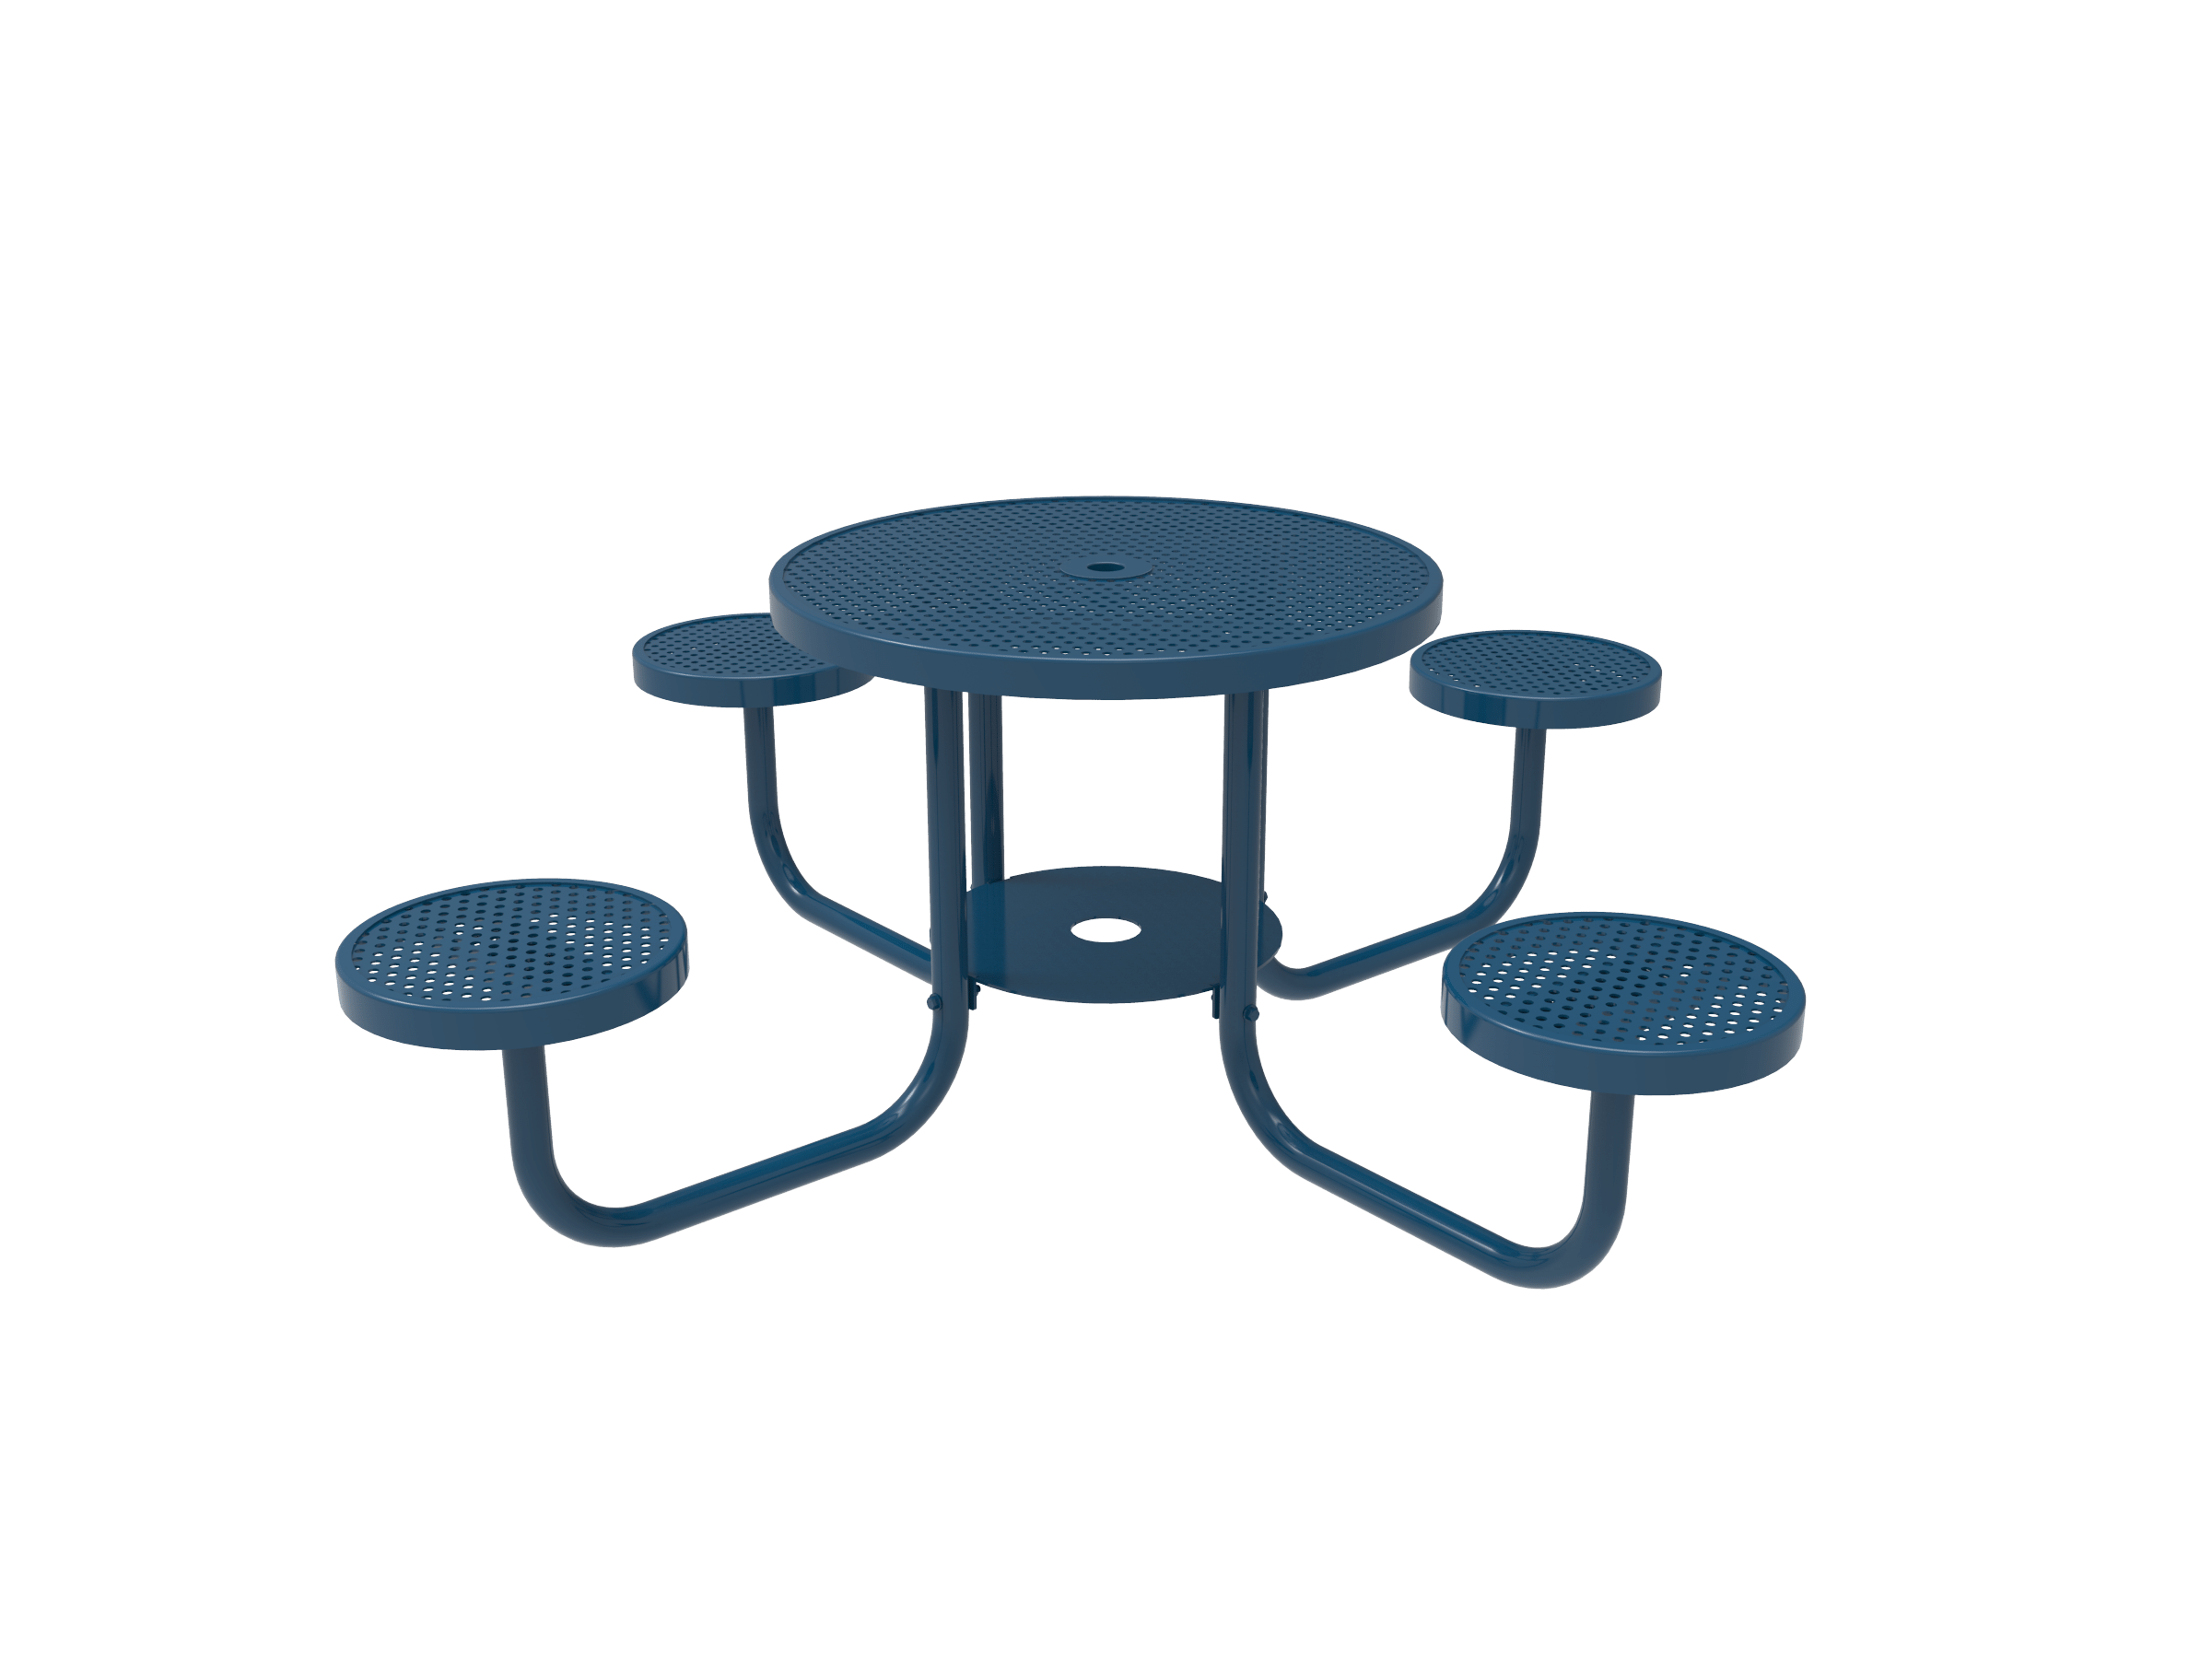 36″ Round Portable Table With Round Seats-Punched
TRD36-D-65-000
Industry Standard Finish
$1439.00
TRD36-B-65-000
Advantage Premium Finish
$1799.00
